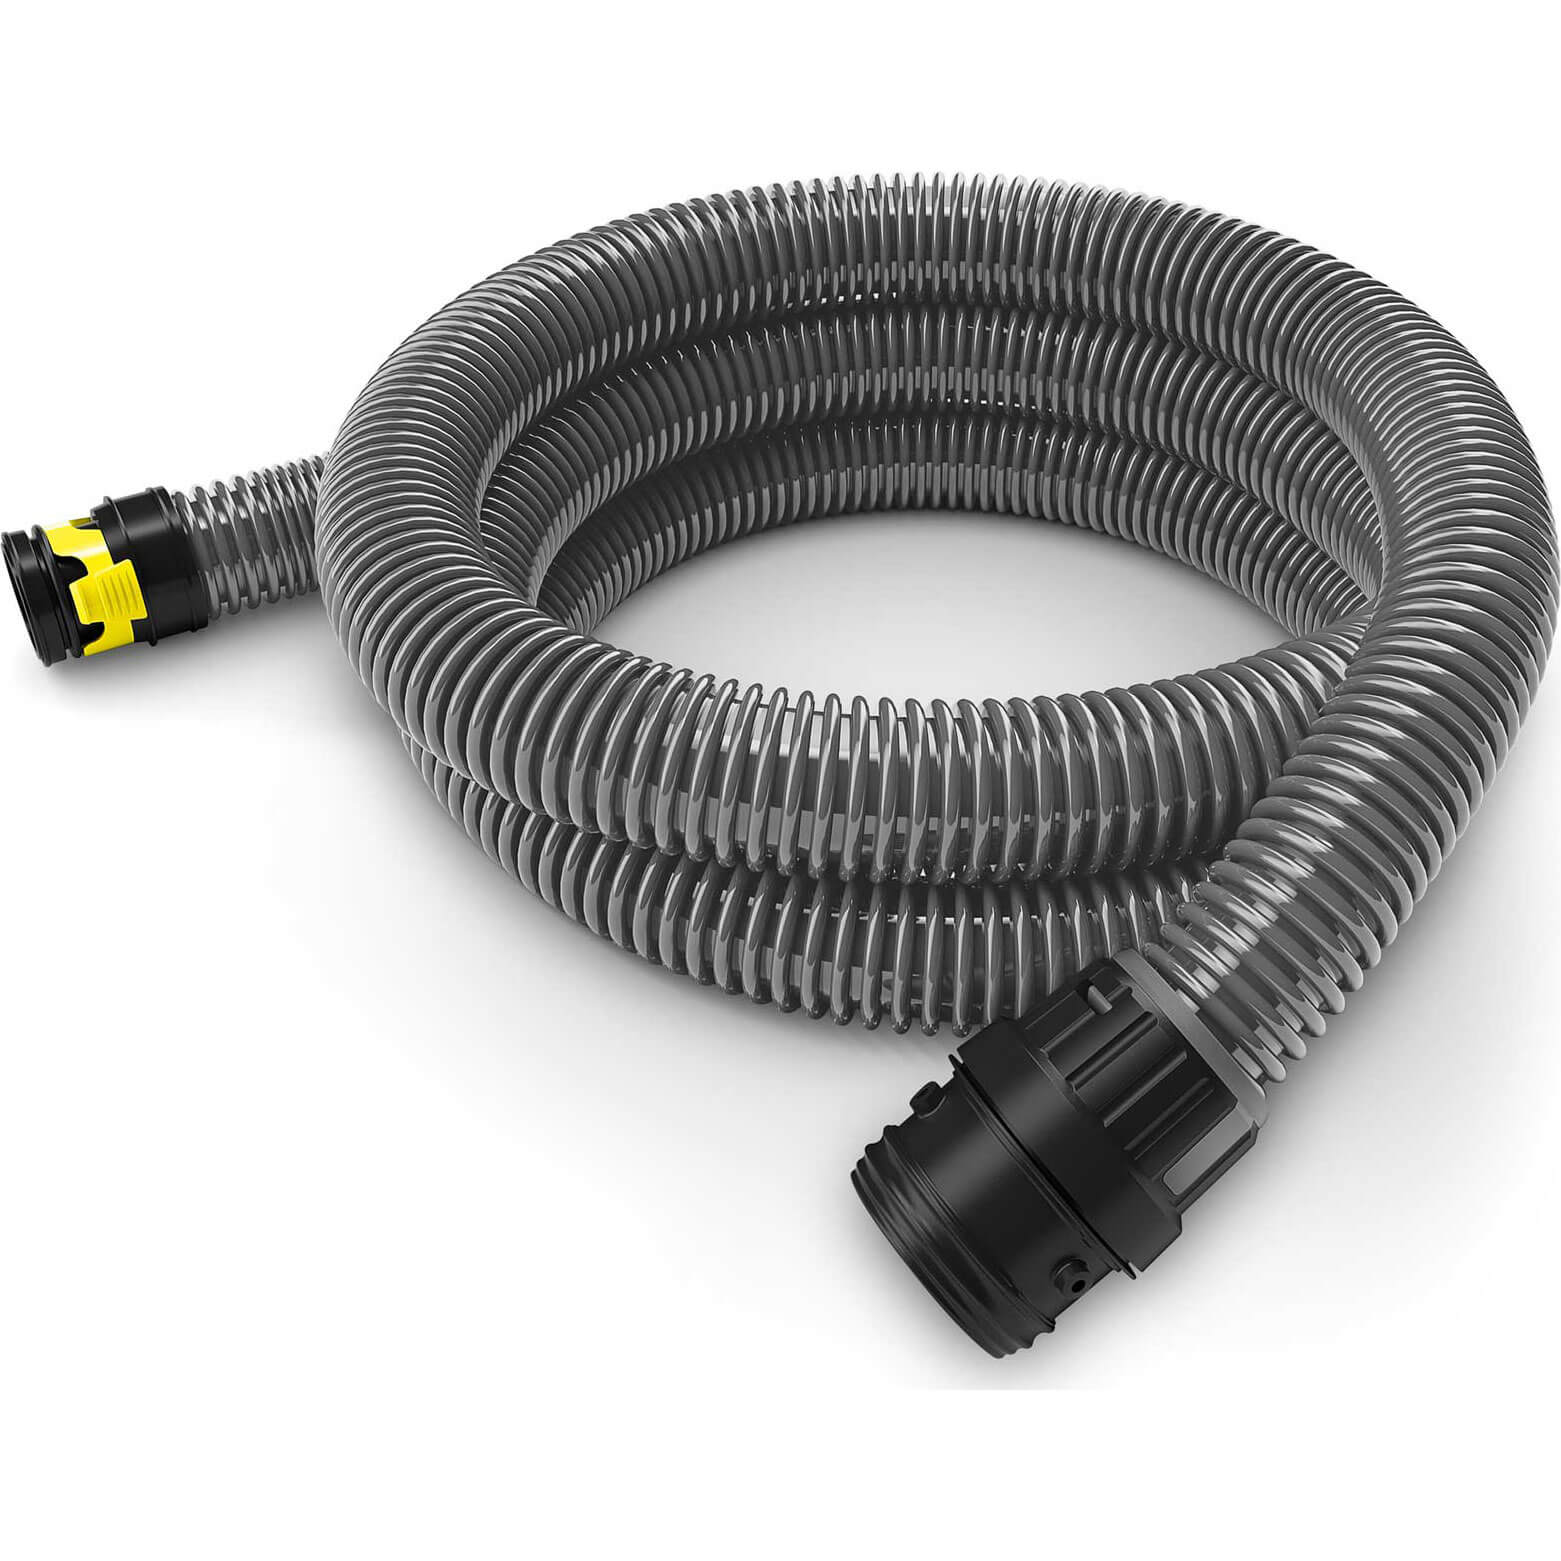 Photo of Karcher Suction Hose 2.5m For Nt 22/1 And 40/1 Vacuum Cleaners 2.5m